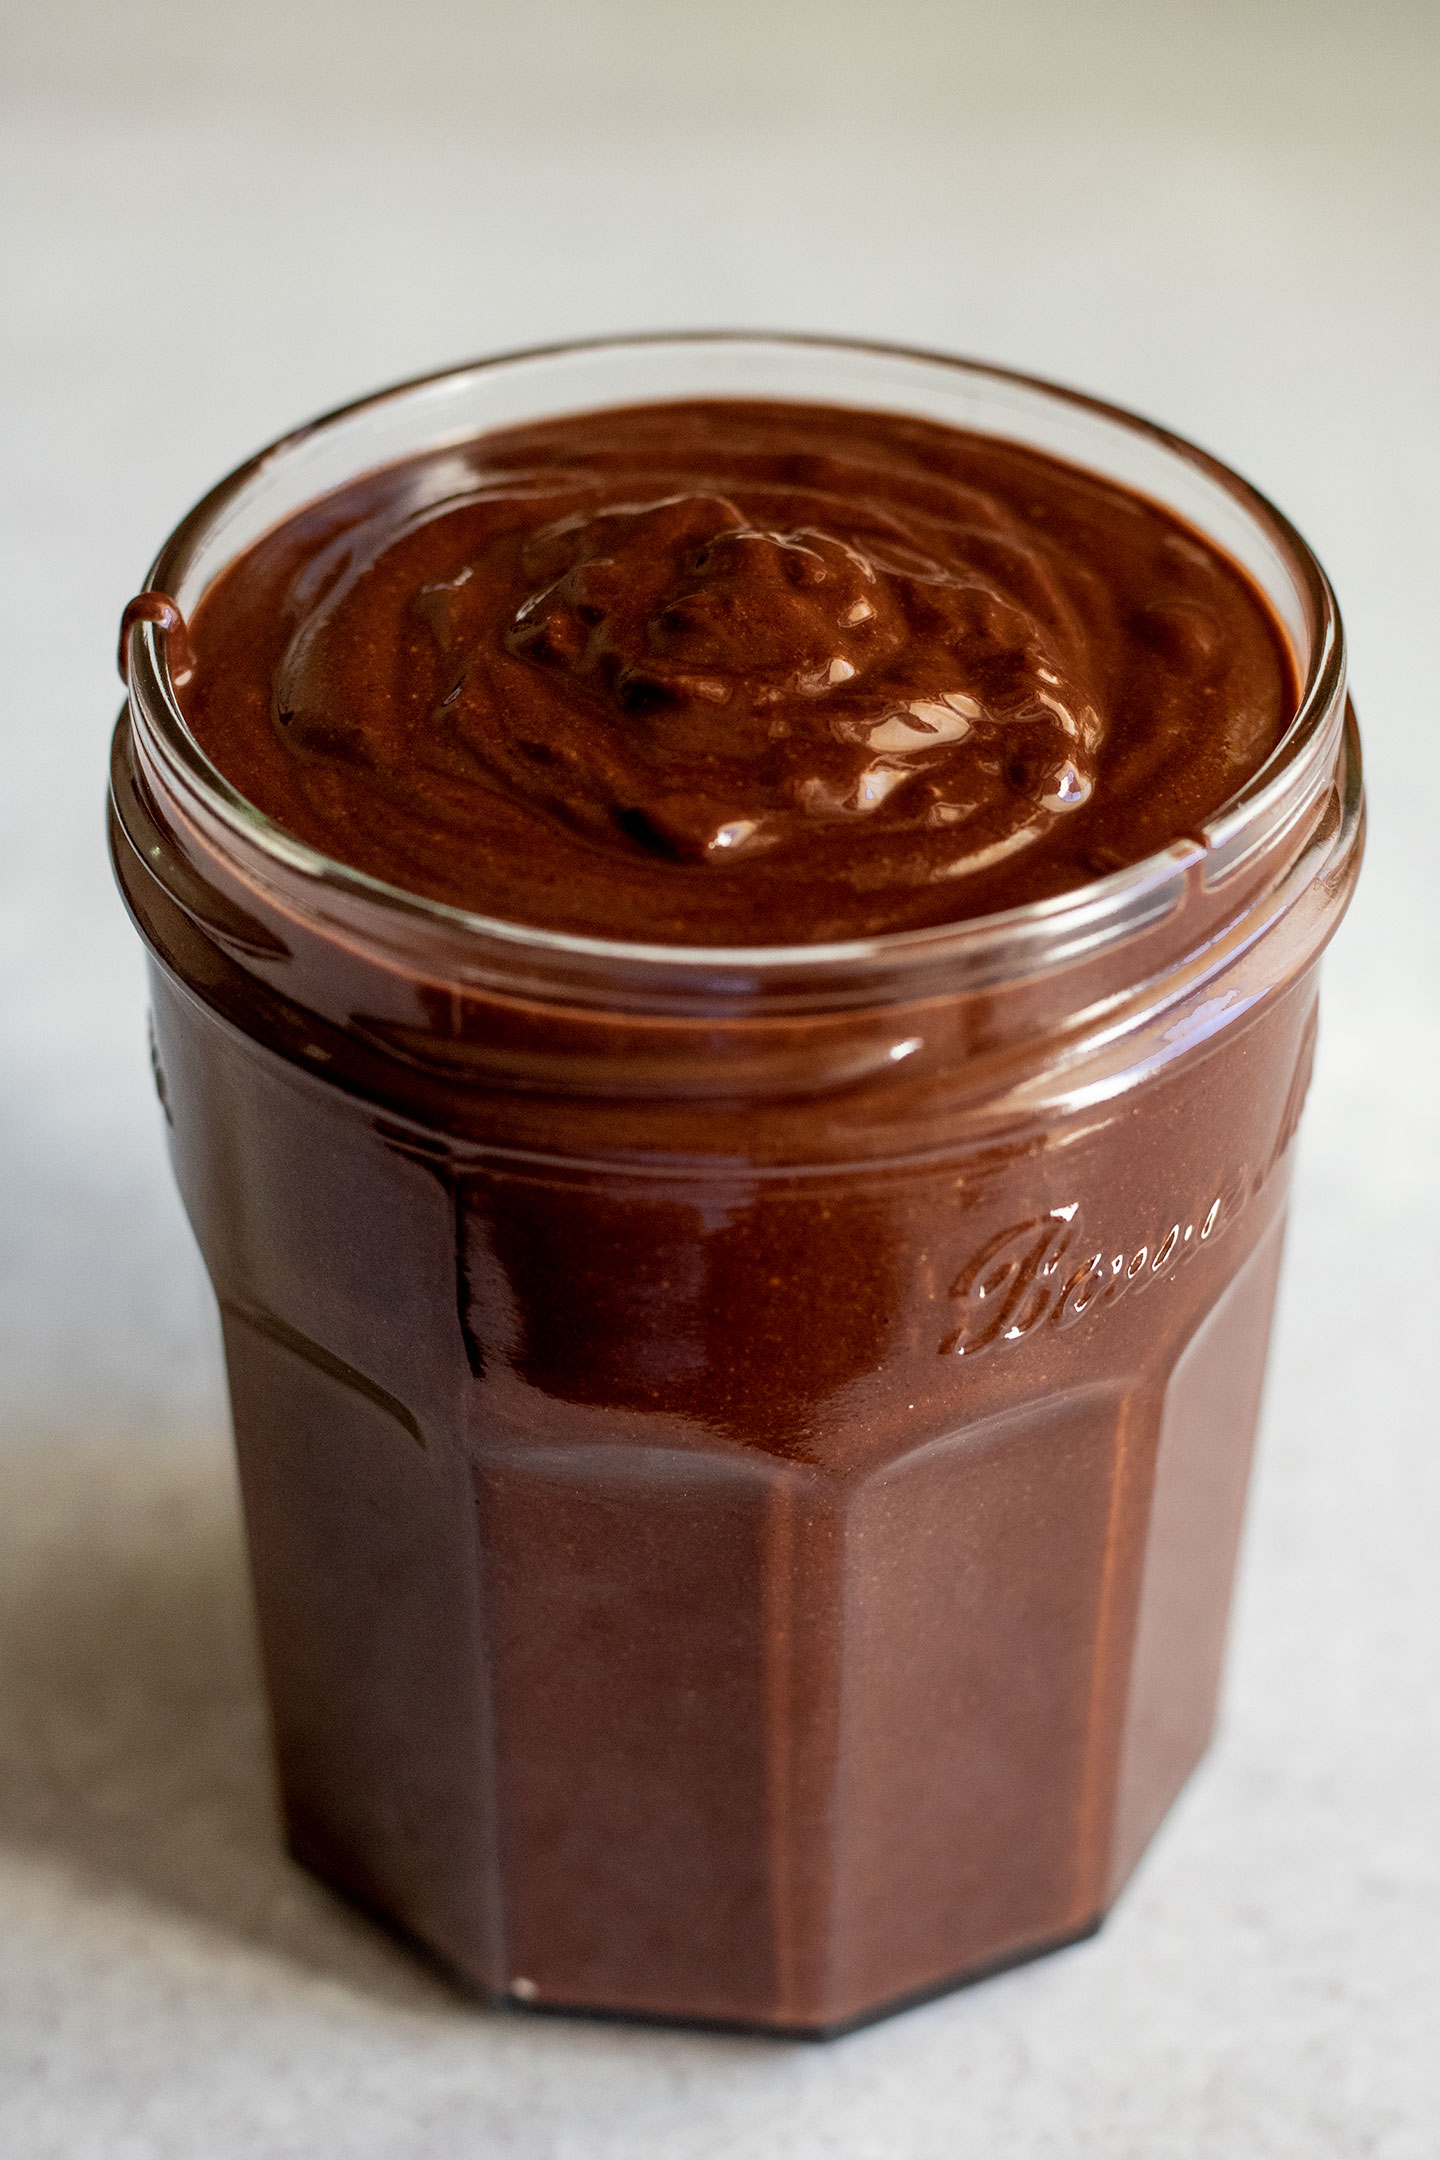 Homemade Nutella poured into a jar for storage.